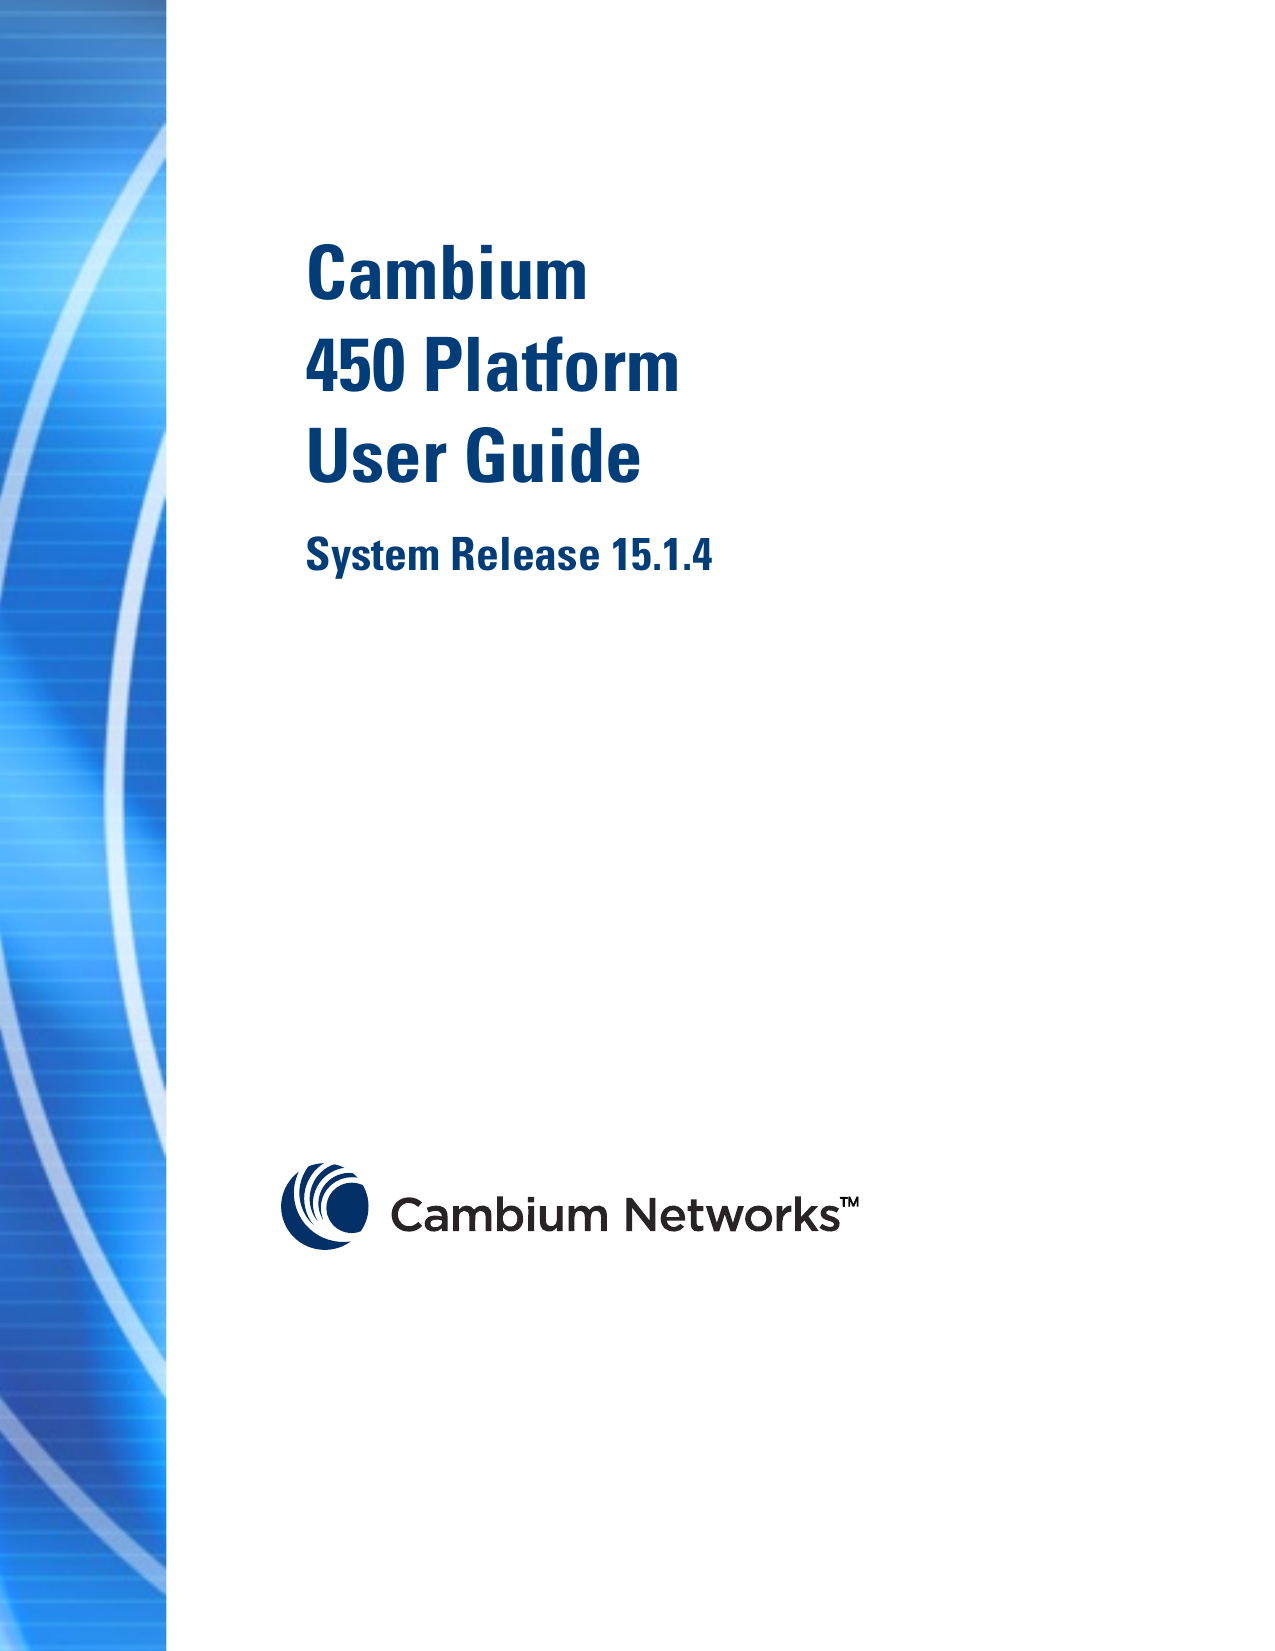  33F  Cambium  450 Platform  User Guide System Release 15.1.4                  pass  